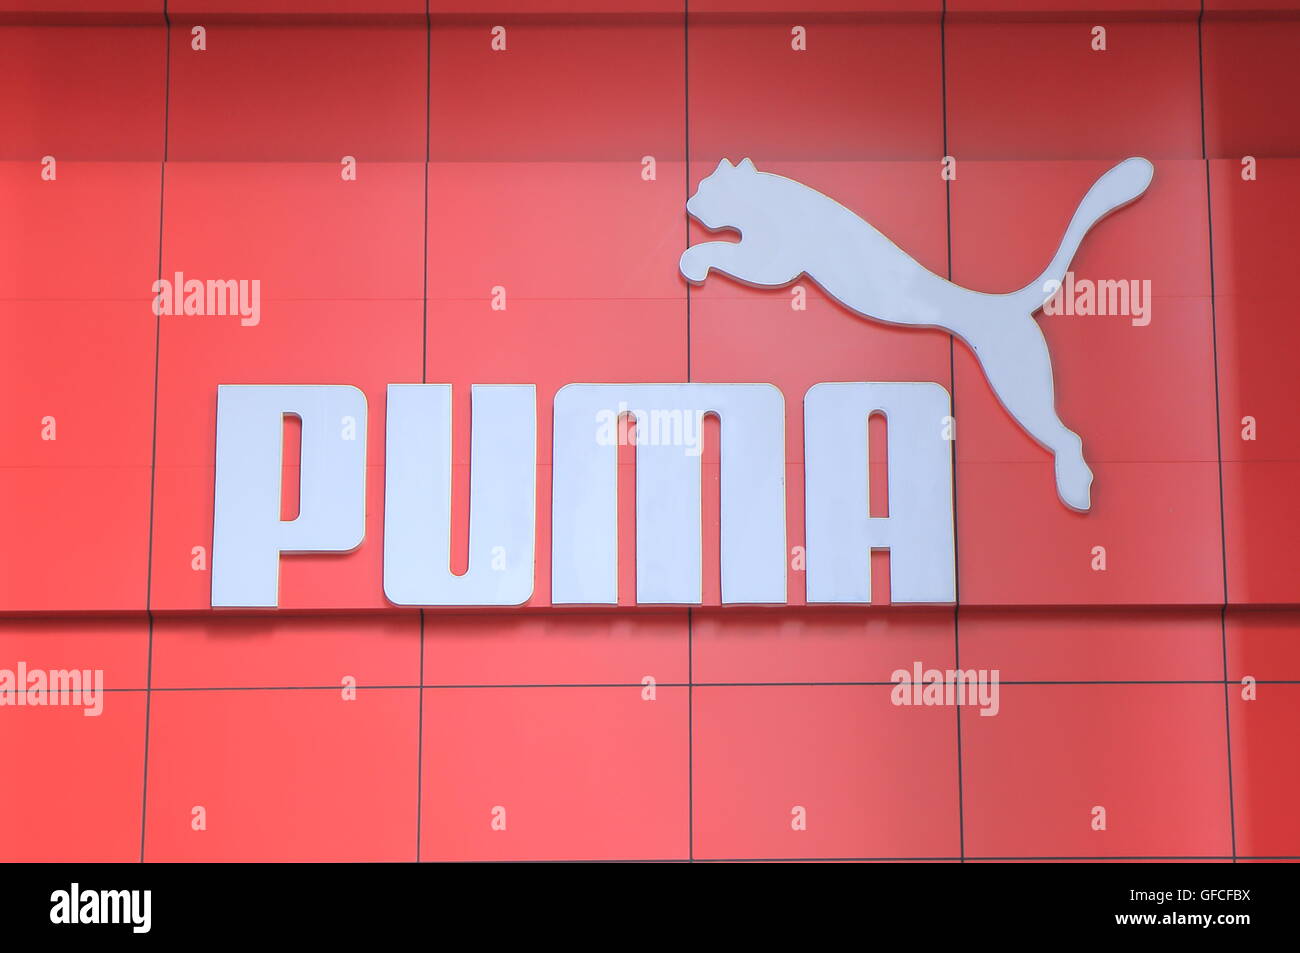 puma company Cheaper Than Retail Price> Buy Clothing, Accessories and ...